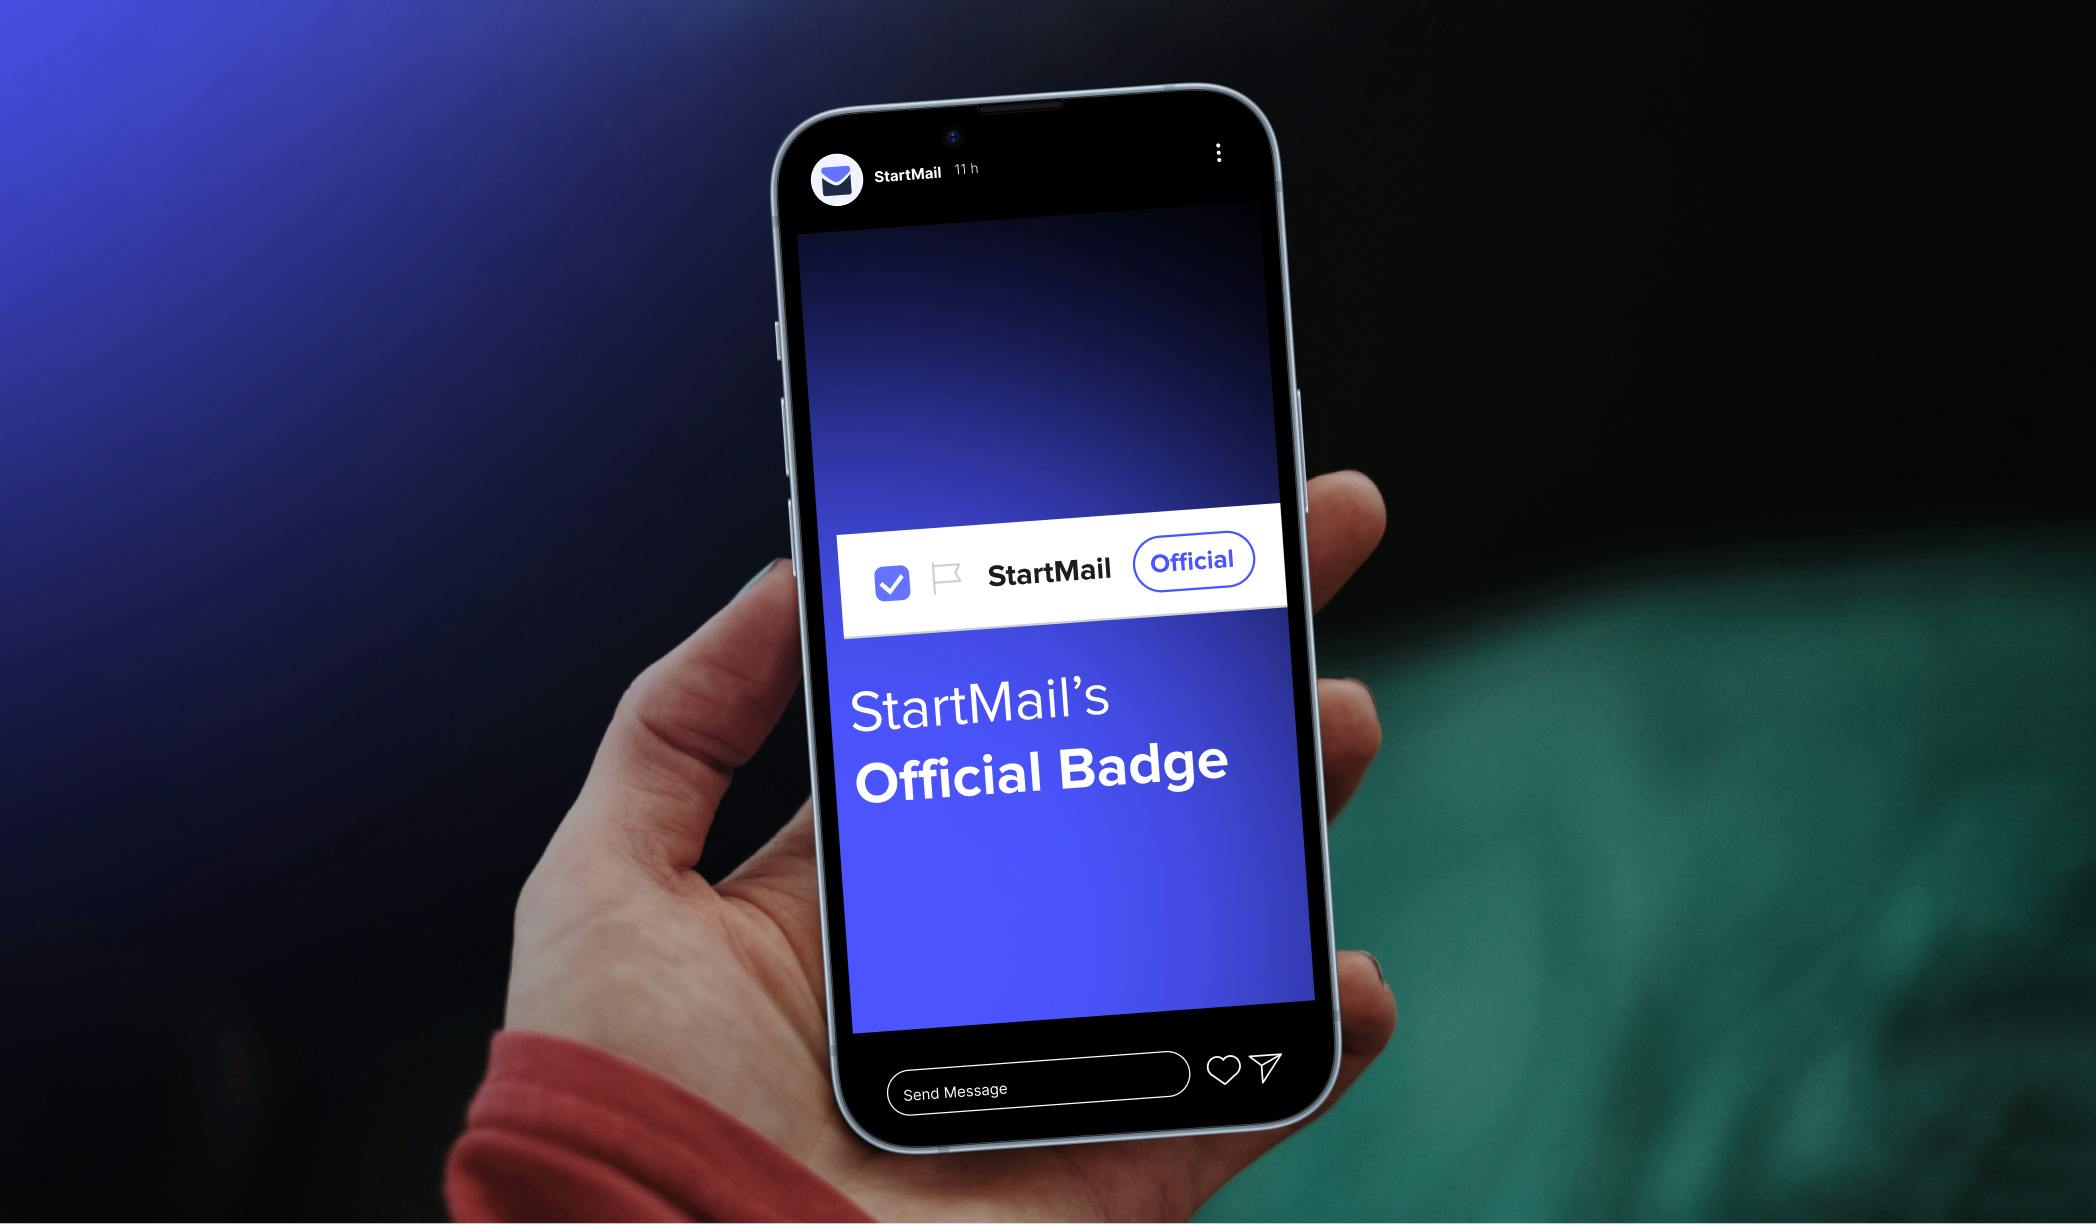 A hand holding a mobile phone displaying StartMail's Official Badge interface and the text 'StartMail's Official Badge'.